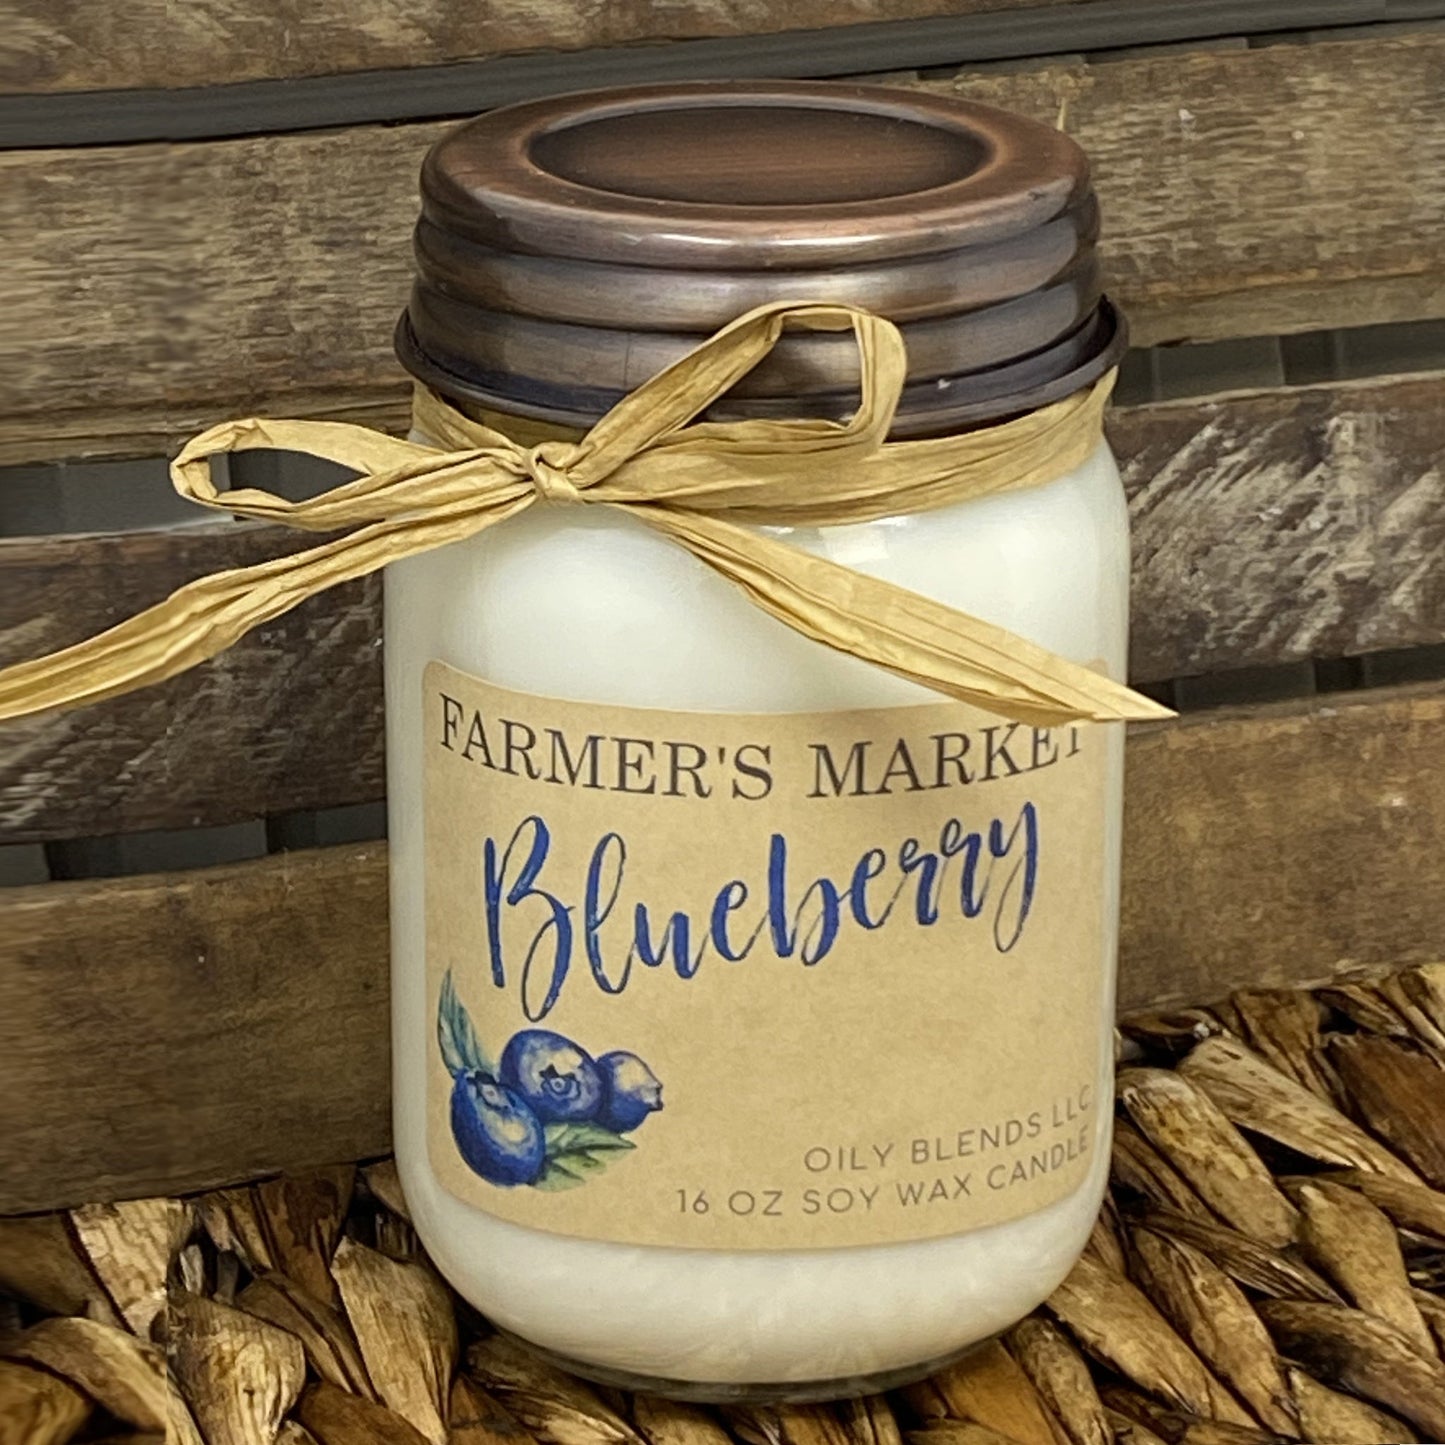 Jumbo Farmer's Market Candles - 100 Hour Burn Time Soy Wax Candles